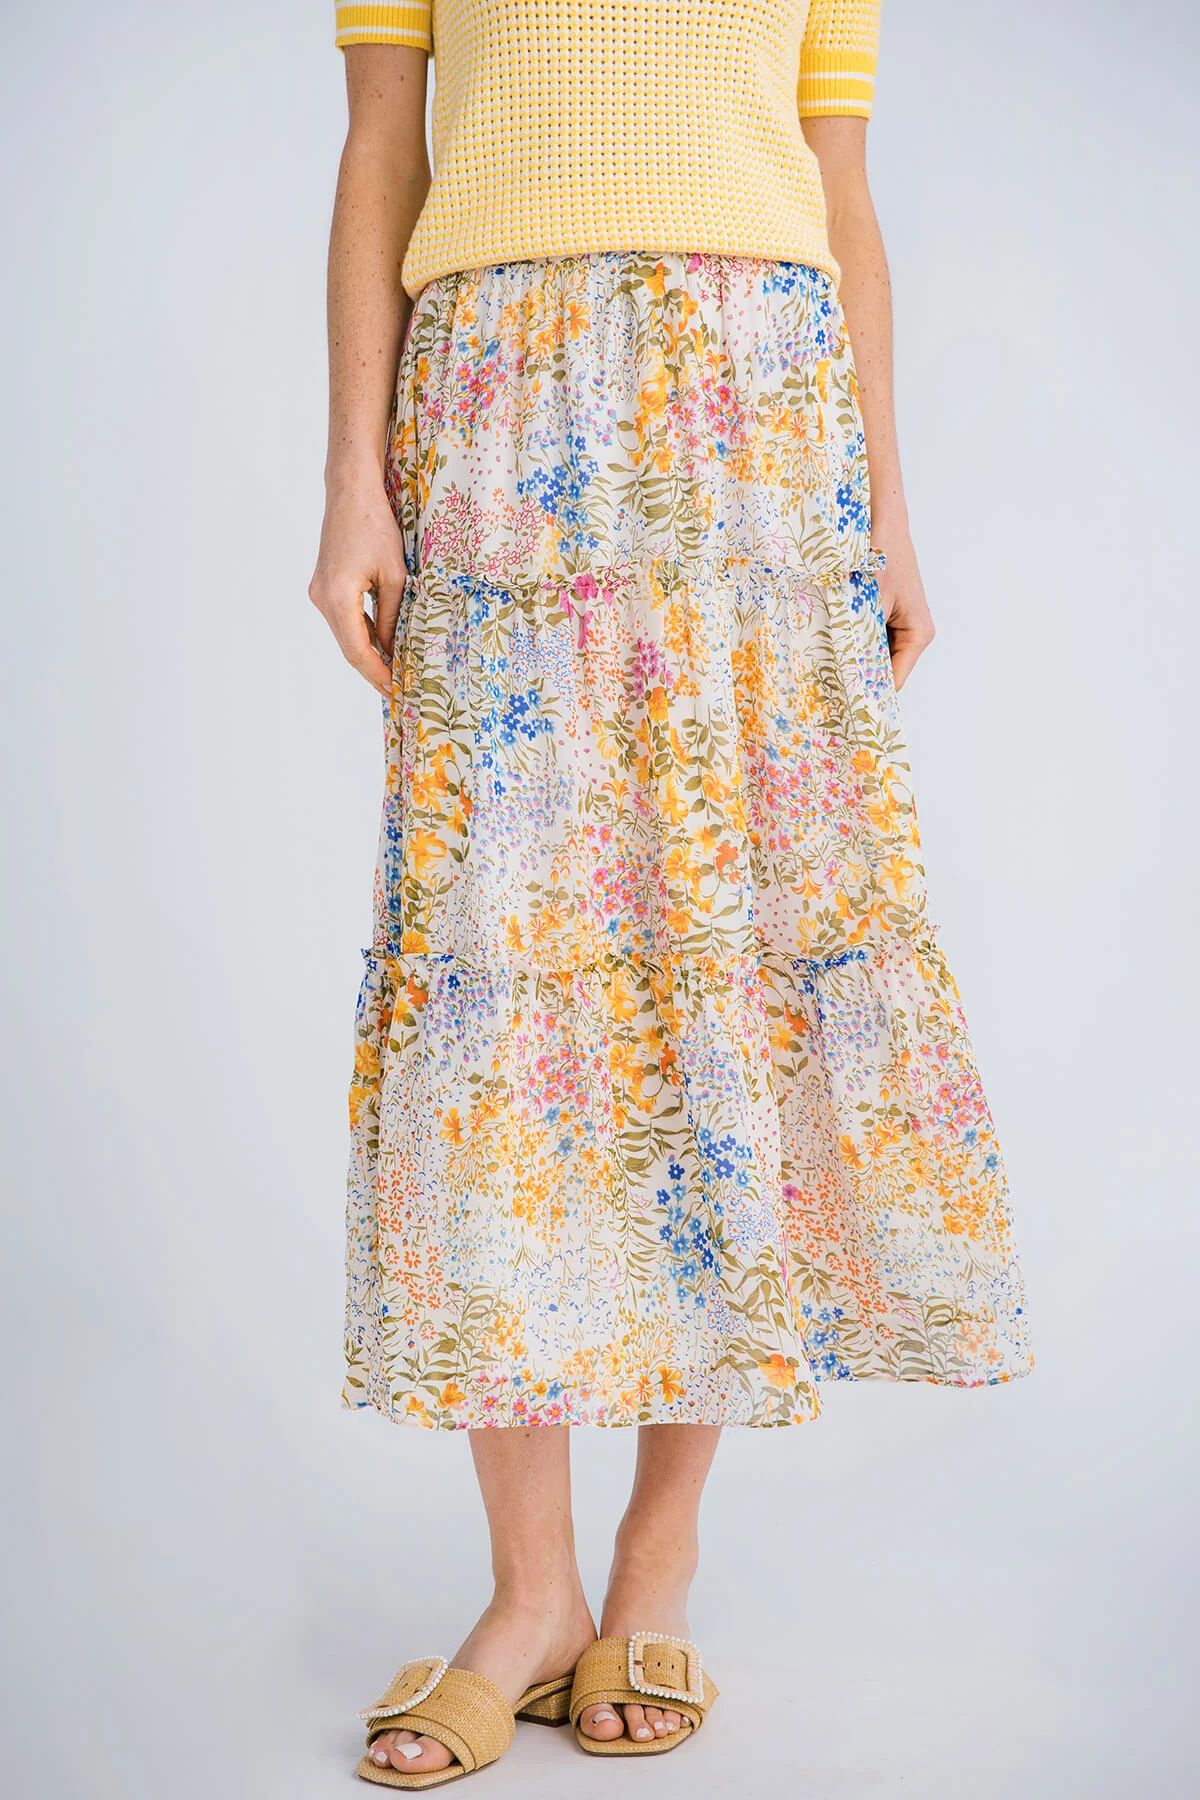 Lucy Paris Evelyn Floral Skirt | Social Threads